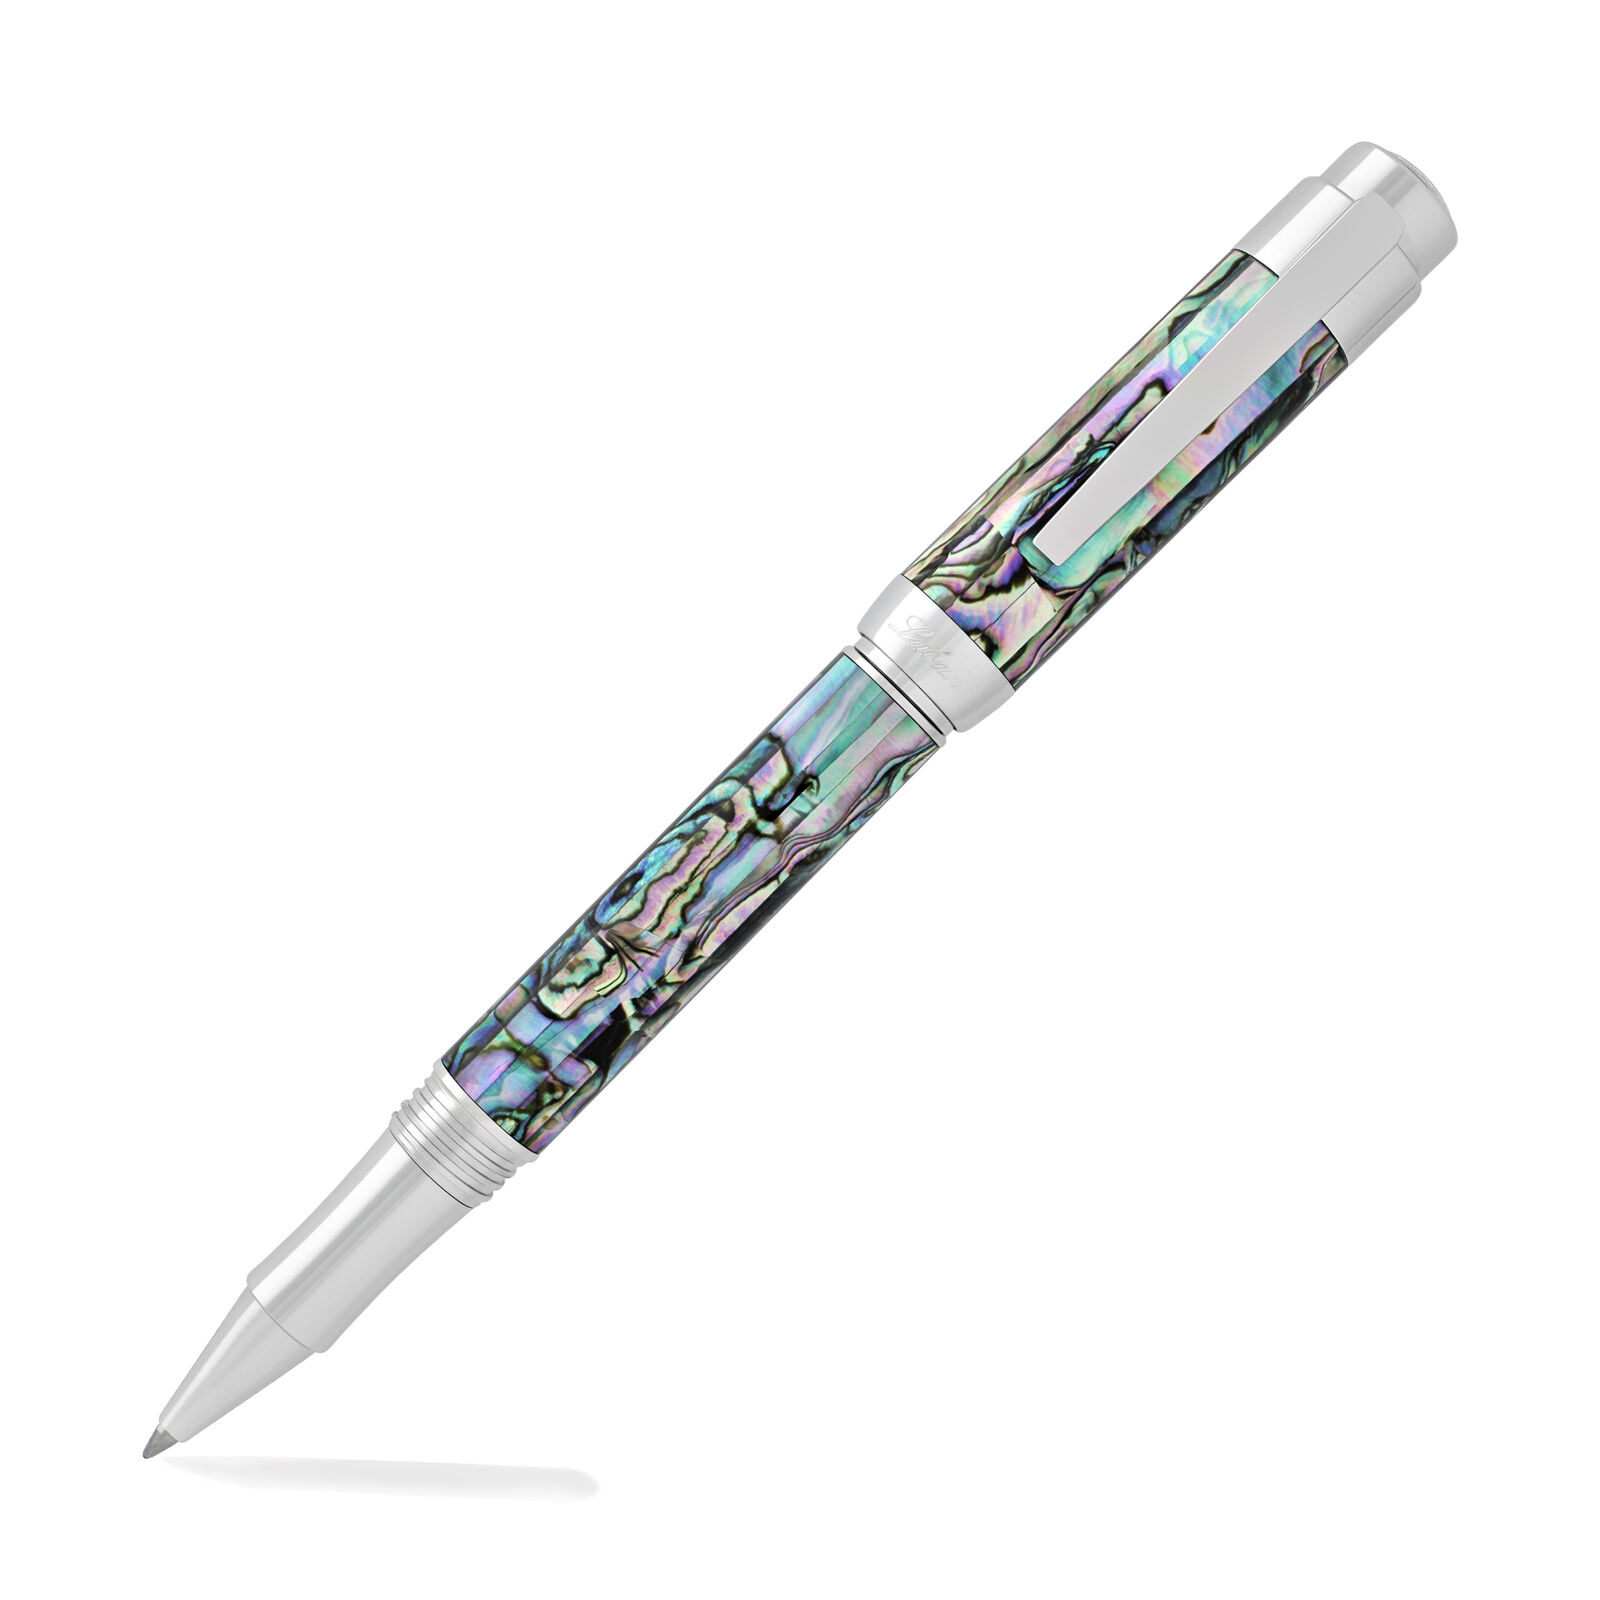 Laban New Abalone with Shiny Chrome Trim - Rollerball Pen NEW in box LMP-R101